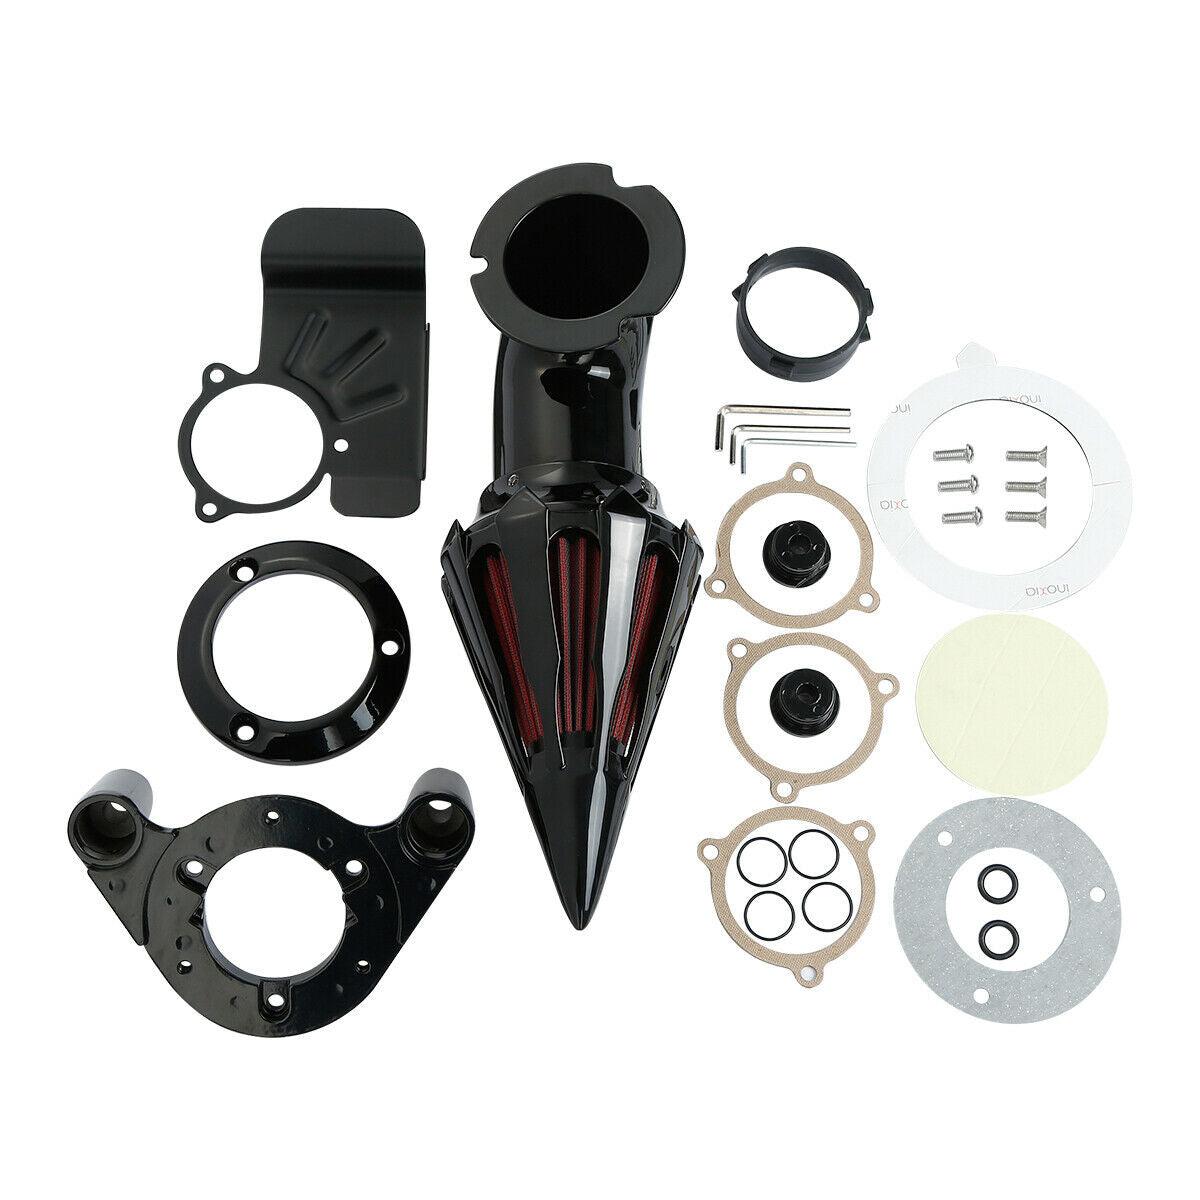 Black Air Cleaner Kit Intake Filter Fit For Harley Touring Electra Glide 08-12 - Moto Life Products